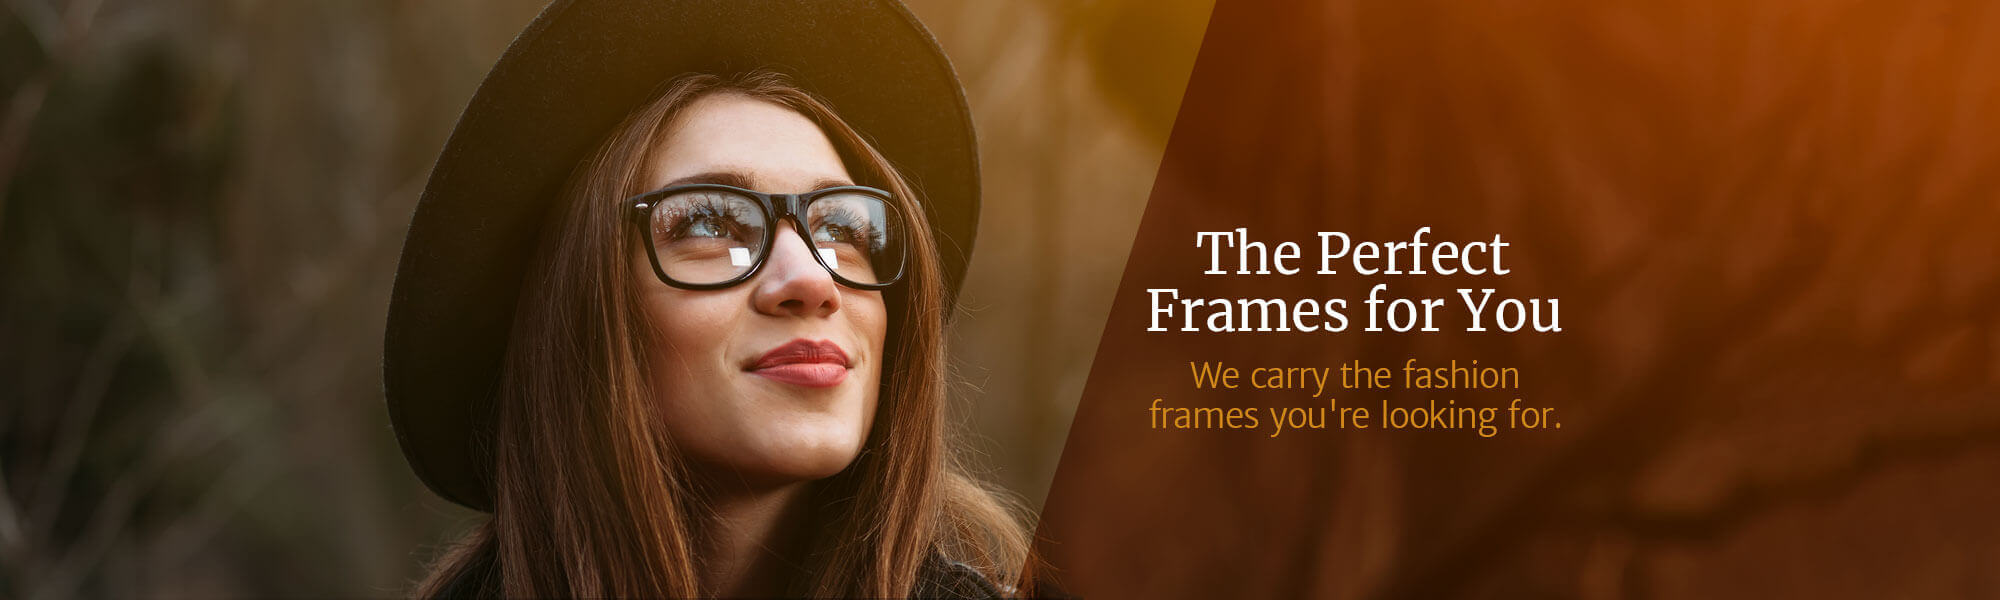 The Perfect Frames